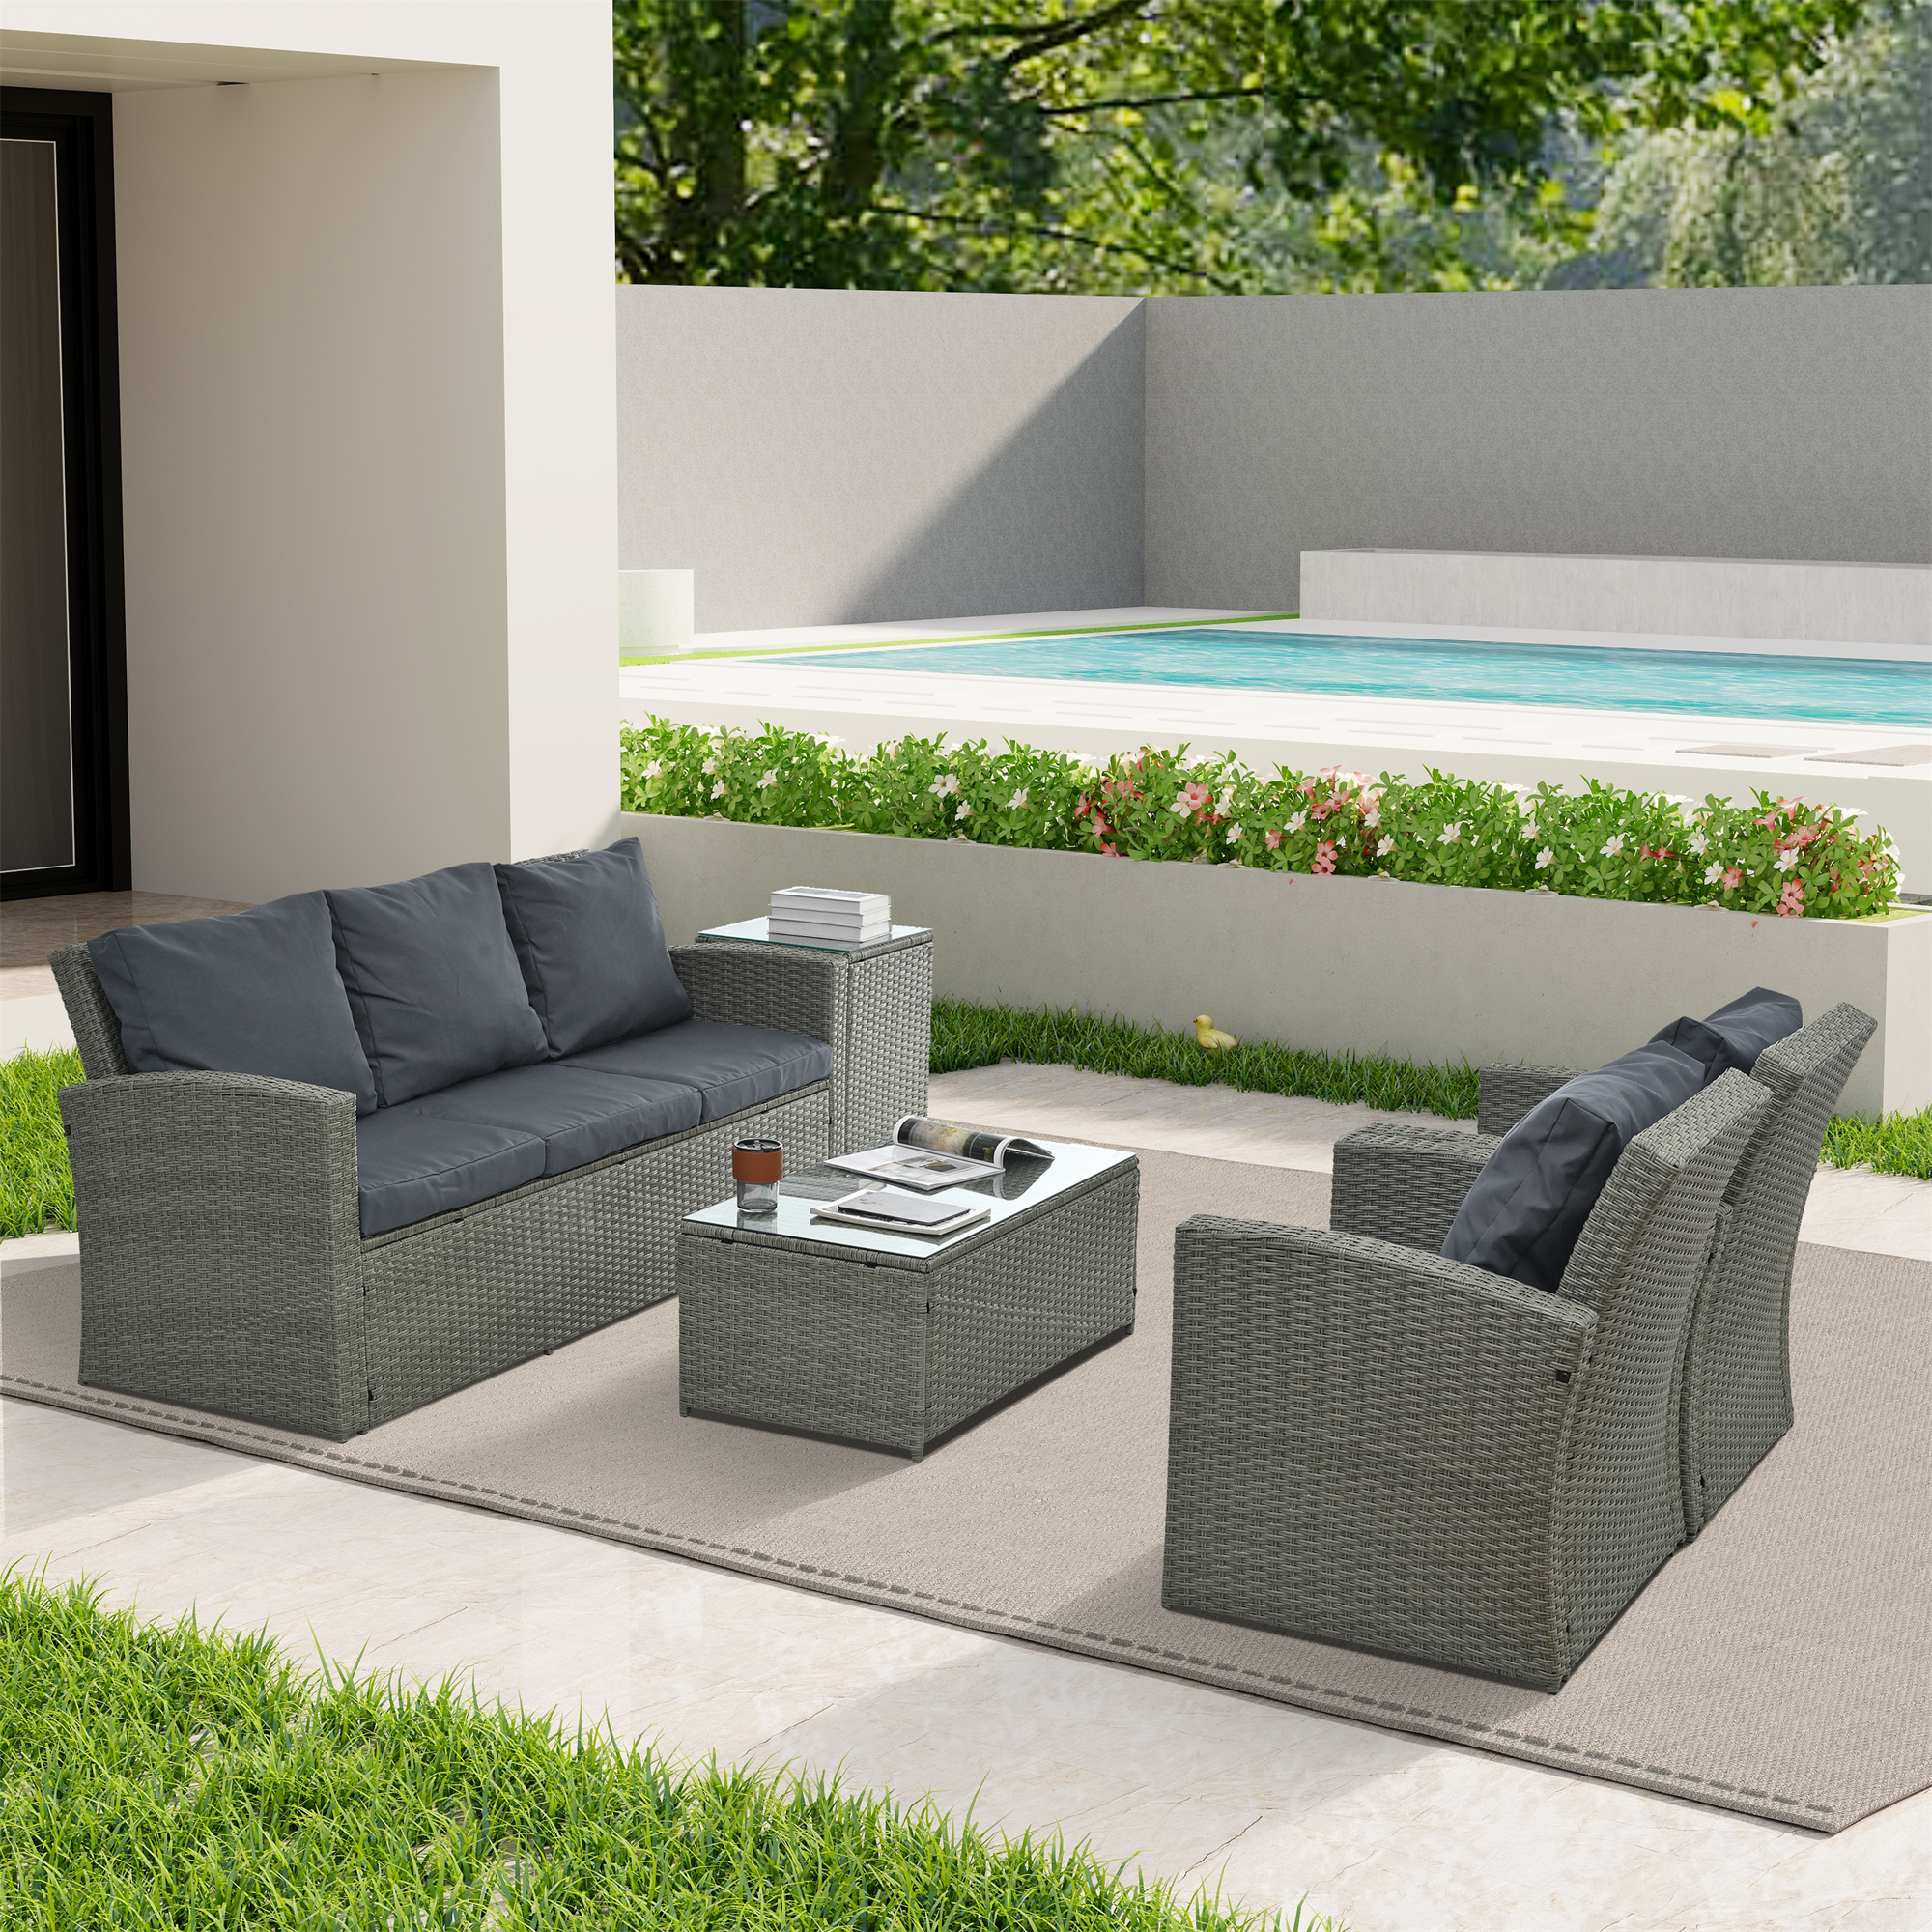 Highsound 5 Pieces Patio Furniture Set, All-Weather PE Rattan Wicker Patio Conversation Set, Cushioned Sofa Set with 2 Glass Tables for Patio Garden Poolside Deck, Gray Cushions - image 2 of 9